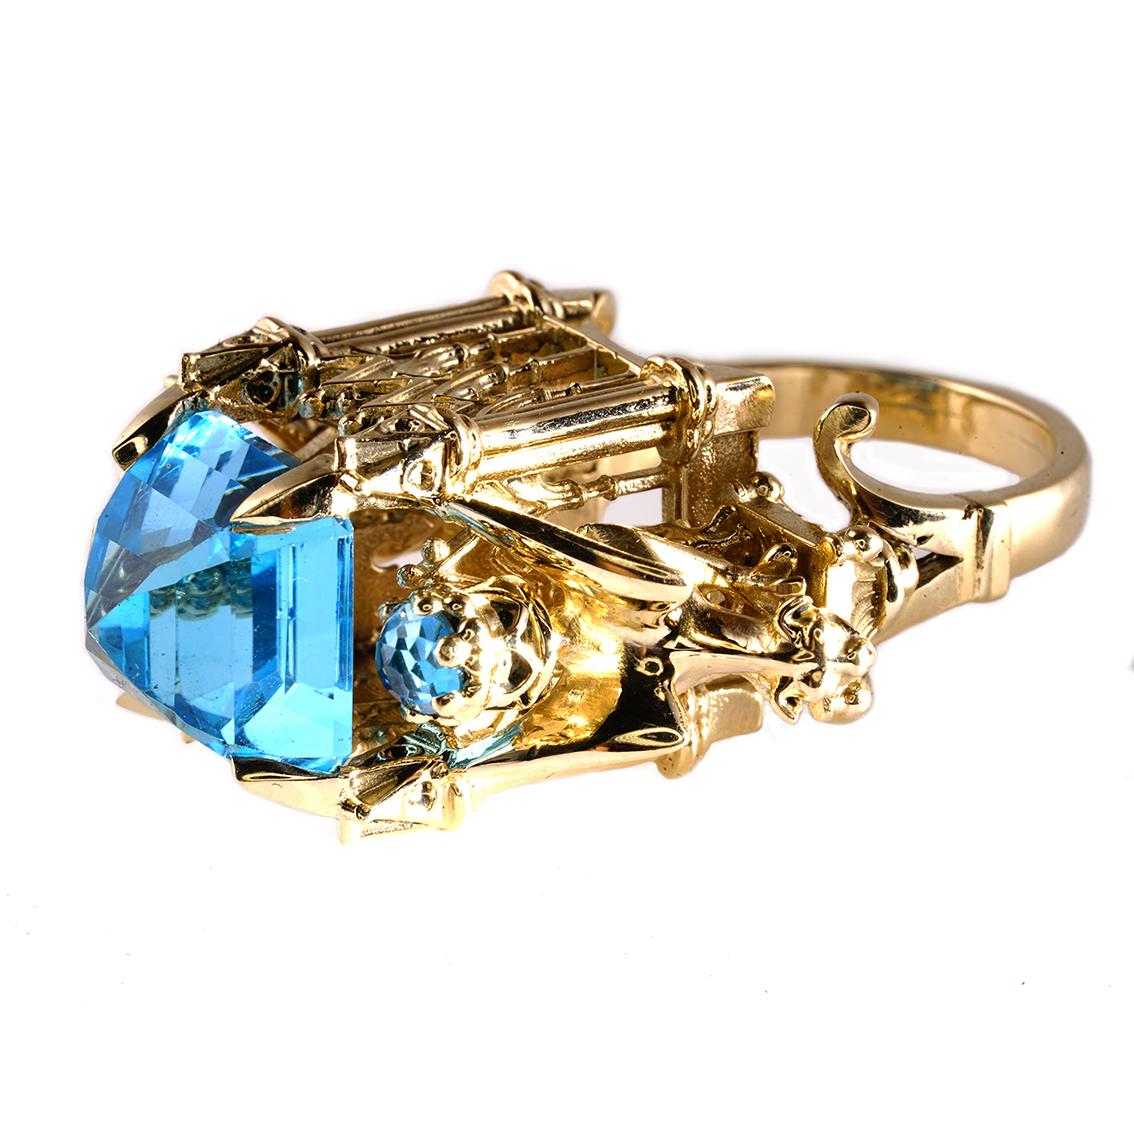 The Alchemist Ring is a wondrous one of a kind piece and fits a size 12 1/4 (Australian & British size Y 1/2).

Handcrafted in 9ct yellow gold this glorious ring features a central 15mm, square topaz, get atop a signature William Llewellyn Griffiths